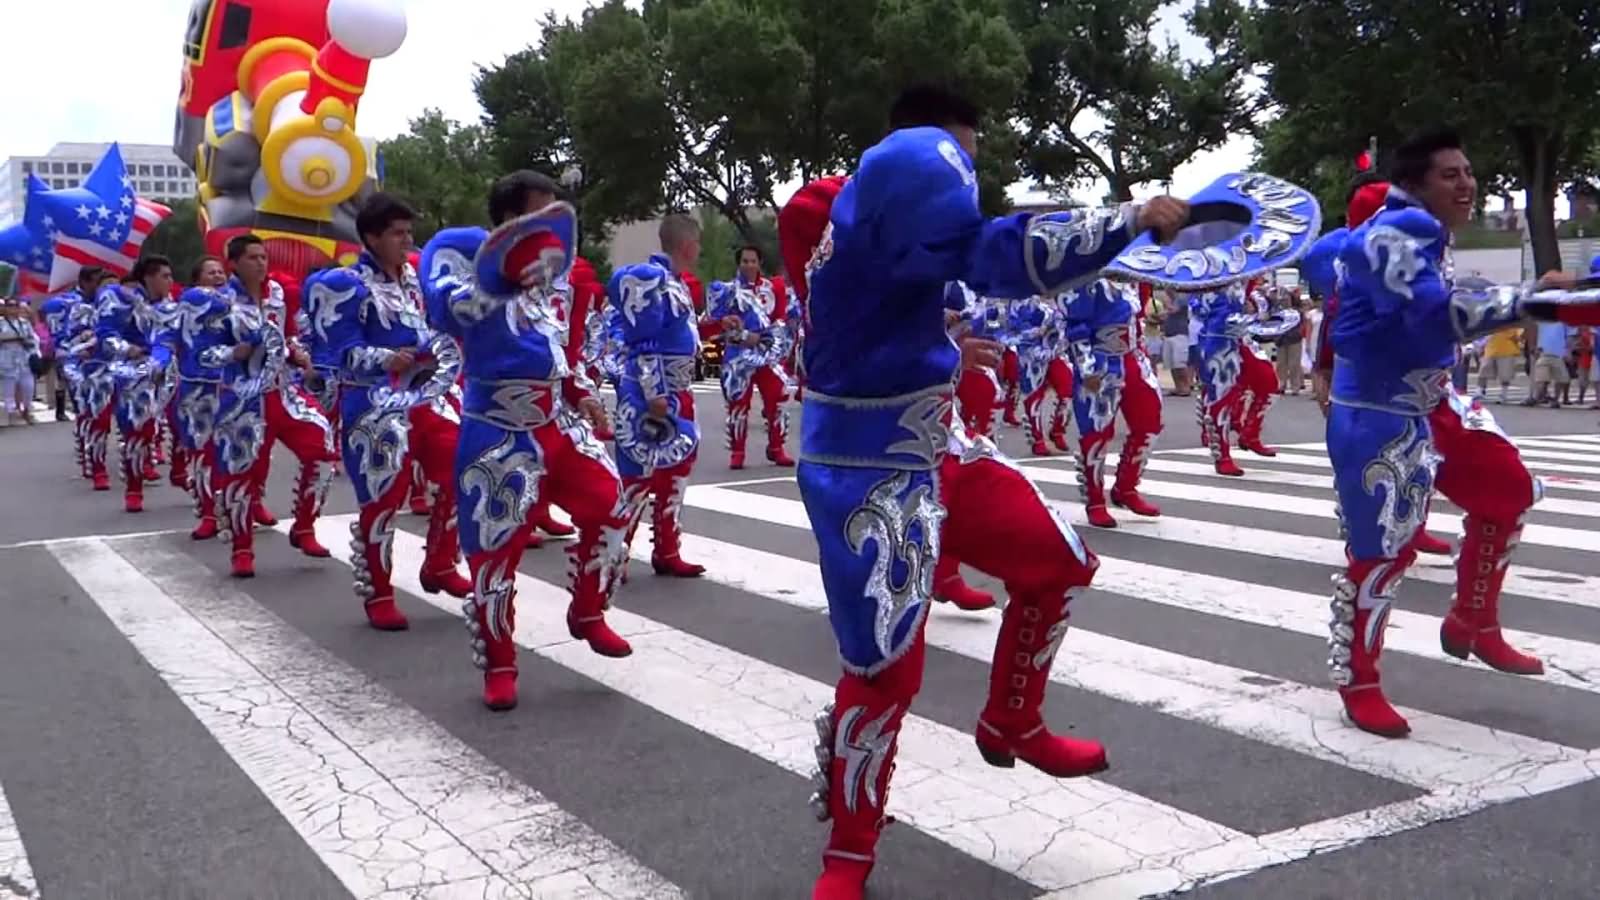 Street Performers Taking Part In USA Independence Day Parade